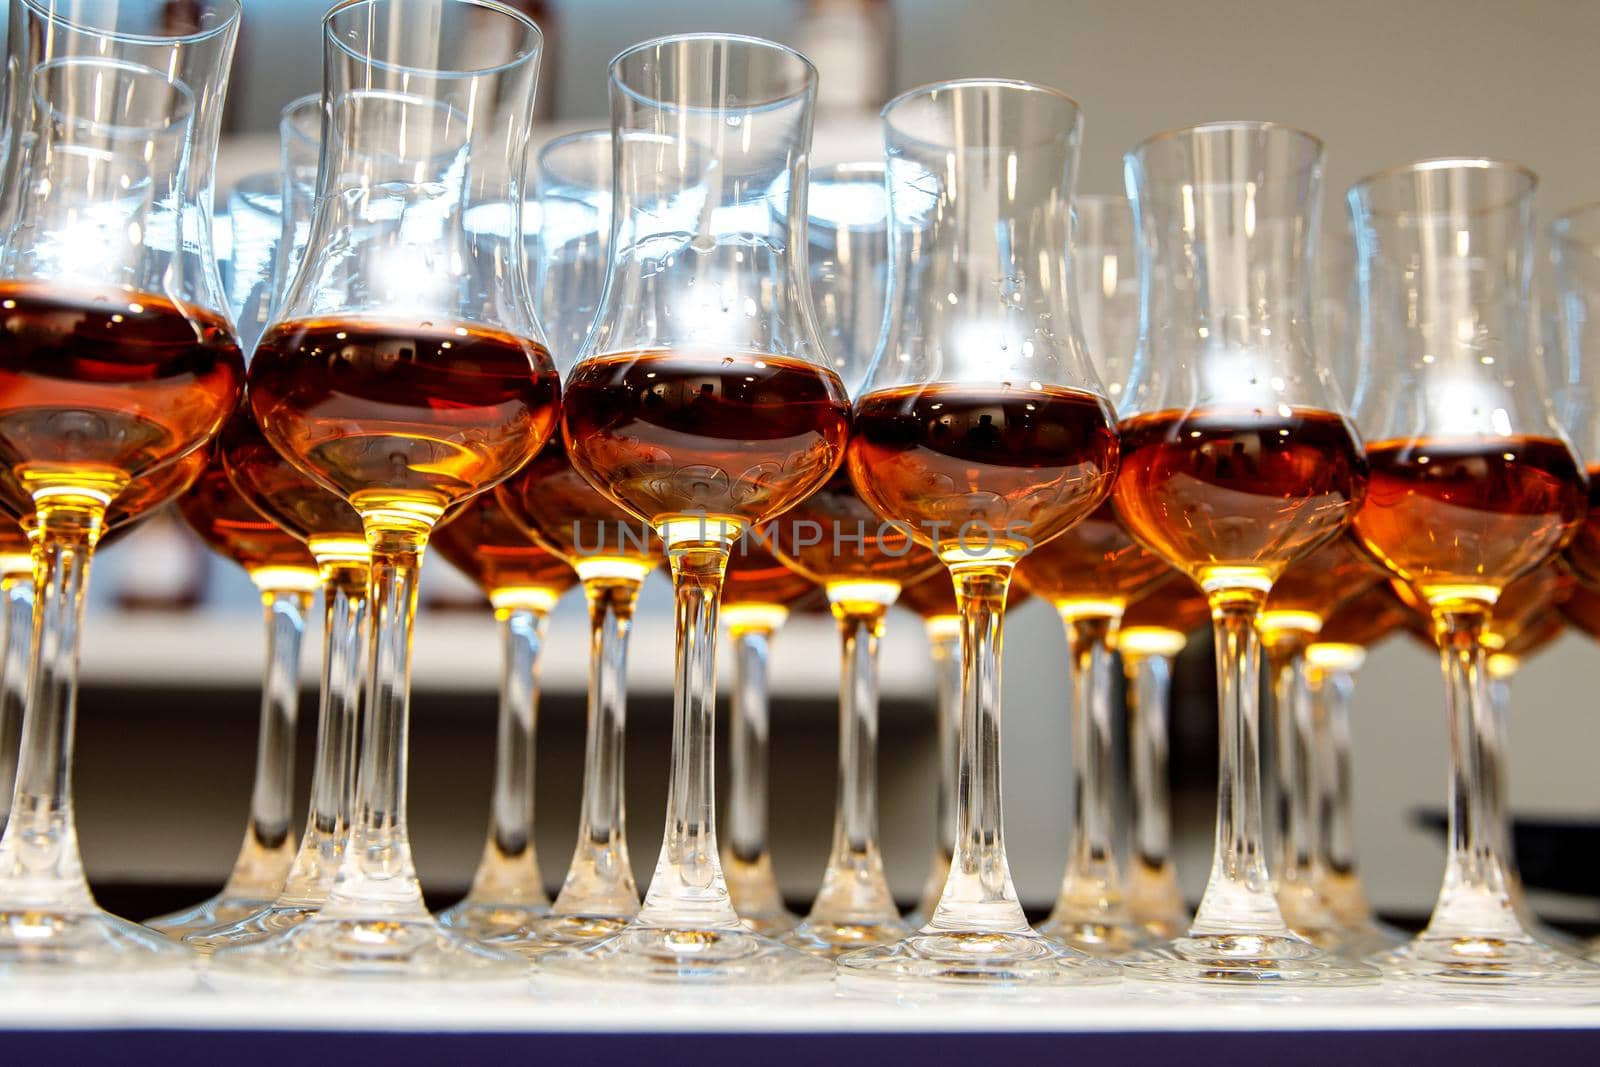 A lot of glasses with cognac